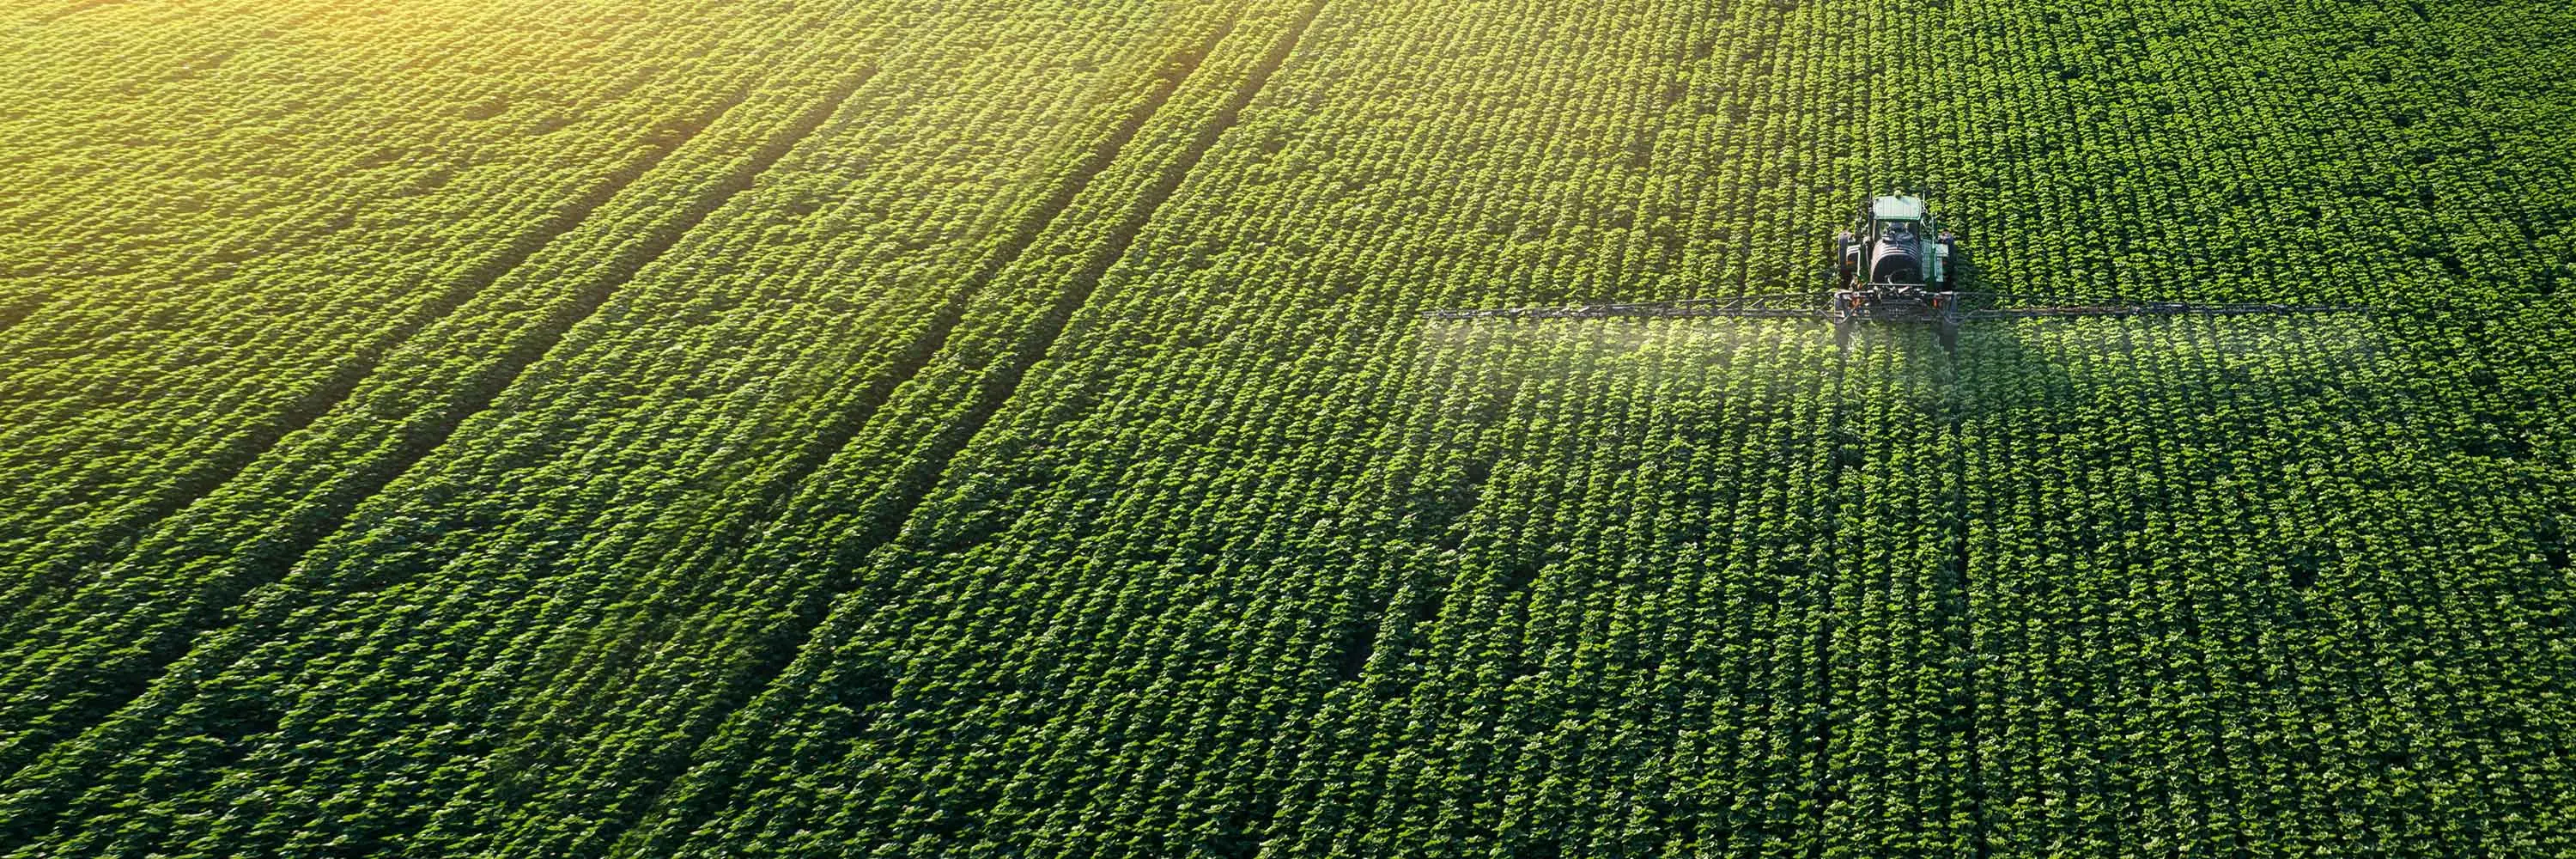 An aerial view of a tractor spraying a field.